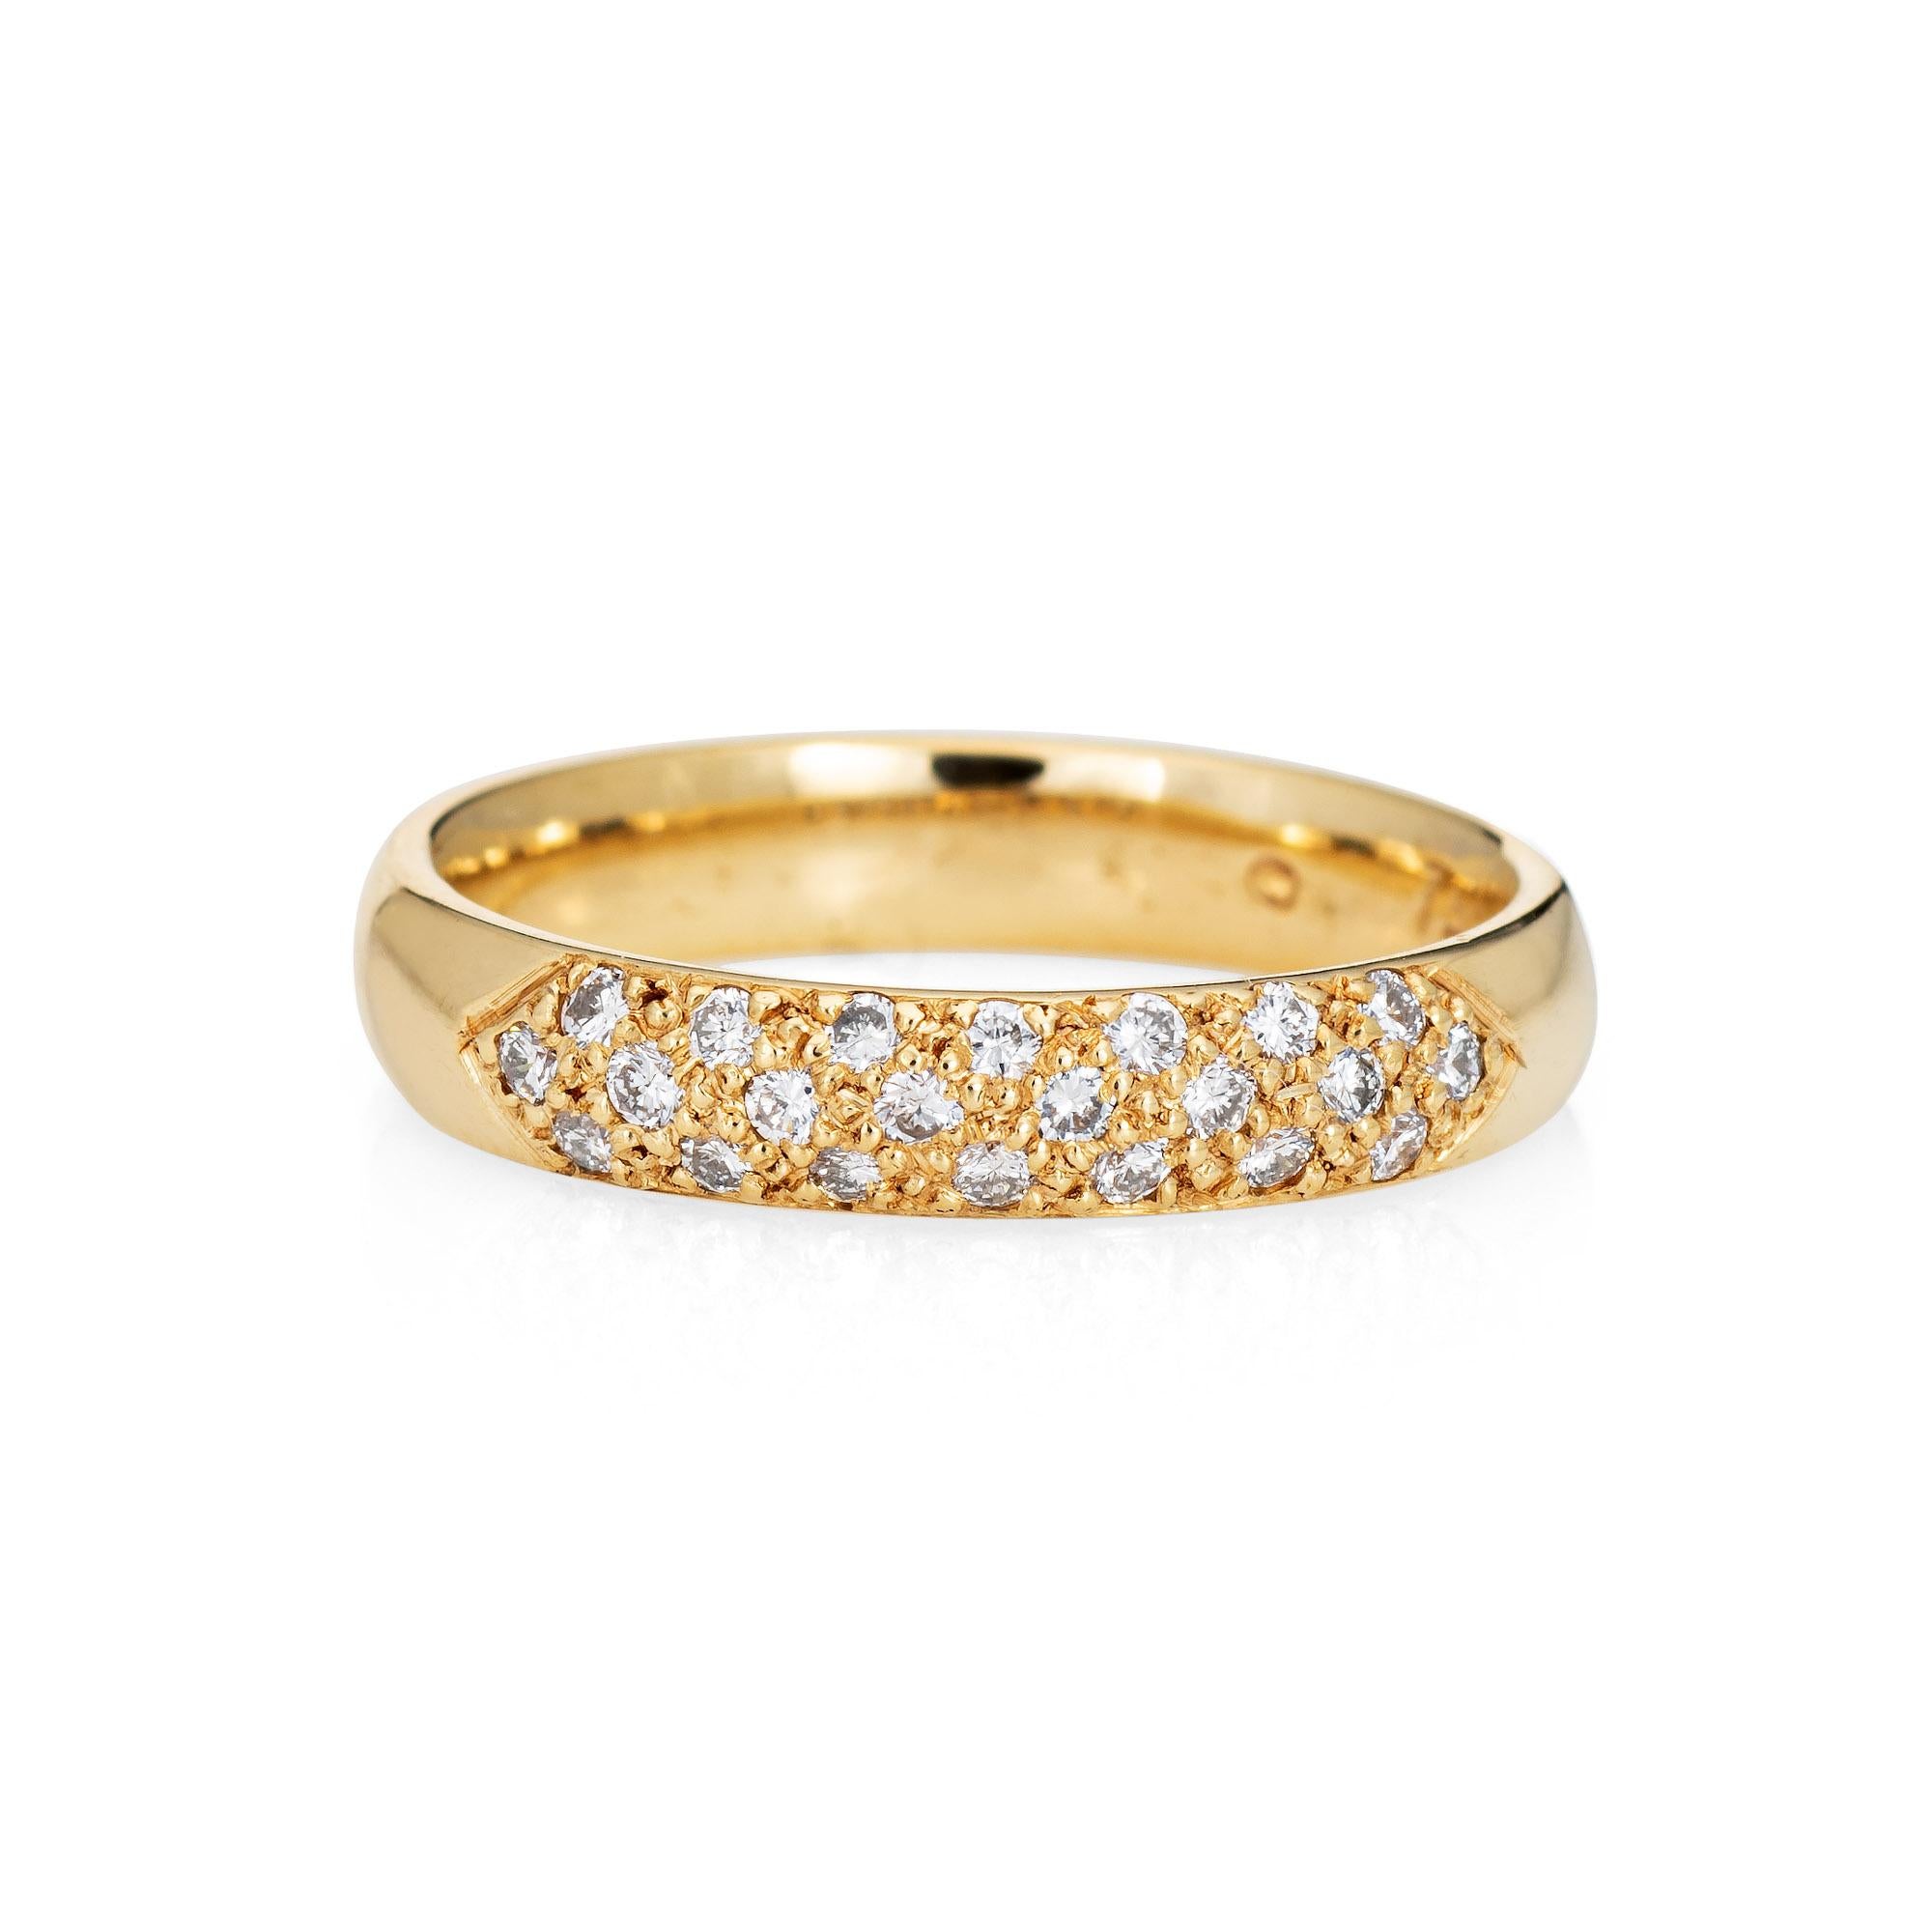 Stylish pave diamond half hoop band crafted in 18 karat yellow gold. 

Round brilliant cut diamonds total an estimated at 0.22 carats (estimated at H-I color and VS2-SI1 clarity). 

The band is pave set with diamonds in a half-hoop design. Great